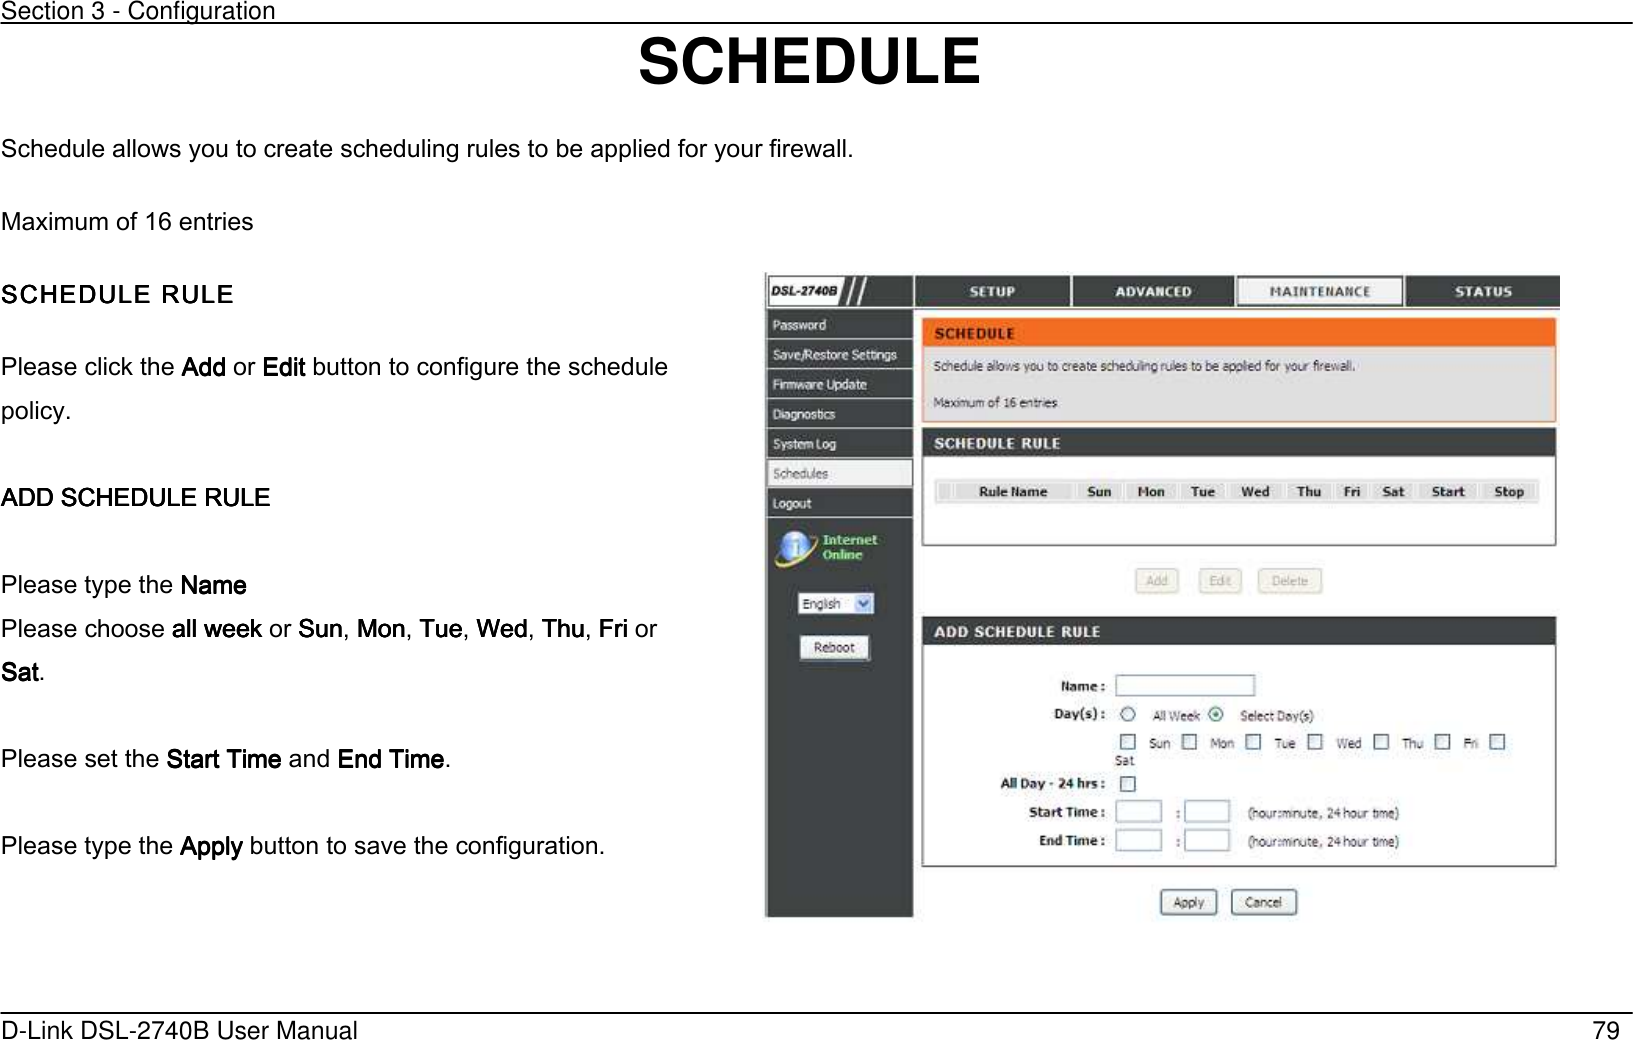 Section 3 - Configuration   D-Link DSL-2740B User Manual                                                  79 SCHEDULE   Schedule allows you to create scheduling rules to be applied for your firewall. Maximum of 16 entries SCHEDULE RULESCHEDULE RULESCHEDULE RULESCHEDULE RULE     Please click the AddAddAddAdd or EditEditEditEdit button to configure the schedule policy.        ADD SCHEDULE RULEADD SCHEDULE RULEADD SCHEDULE RULEADD SCHEDULE RULE        Please type the NameNameNameName Please choose all weekall weekall weekall week or SunSunSunSun, MonMonMonMon, TueTueTueTue, WedWedWedWed, ThuThuThuThu, FriFriFriFri or SatSatSatSat.  Please set the Start Time Start Time Start Time Start Time and End TimeEnd TimeEnd TimeEnd Time.  Please type the ApplyApplyApplyApply button to save the configuration.   